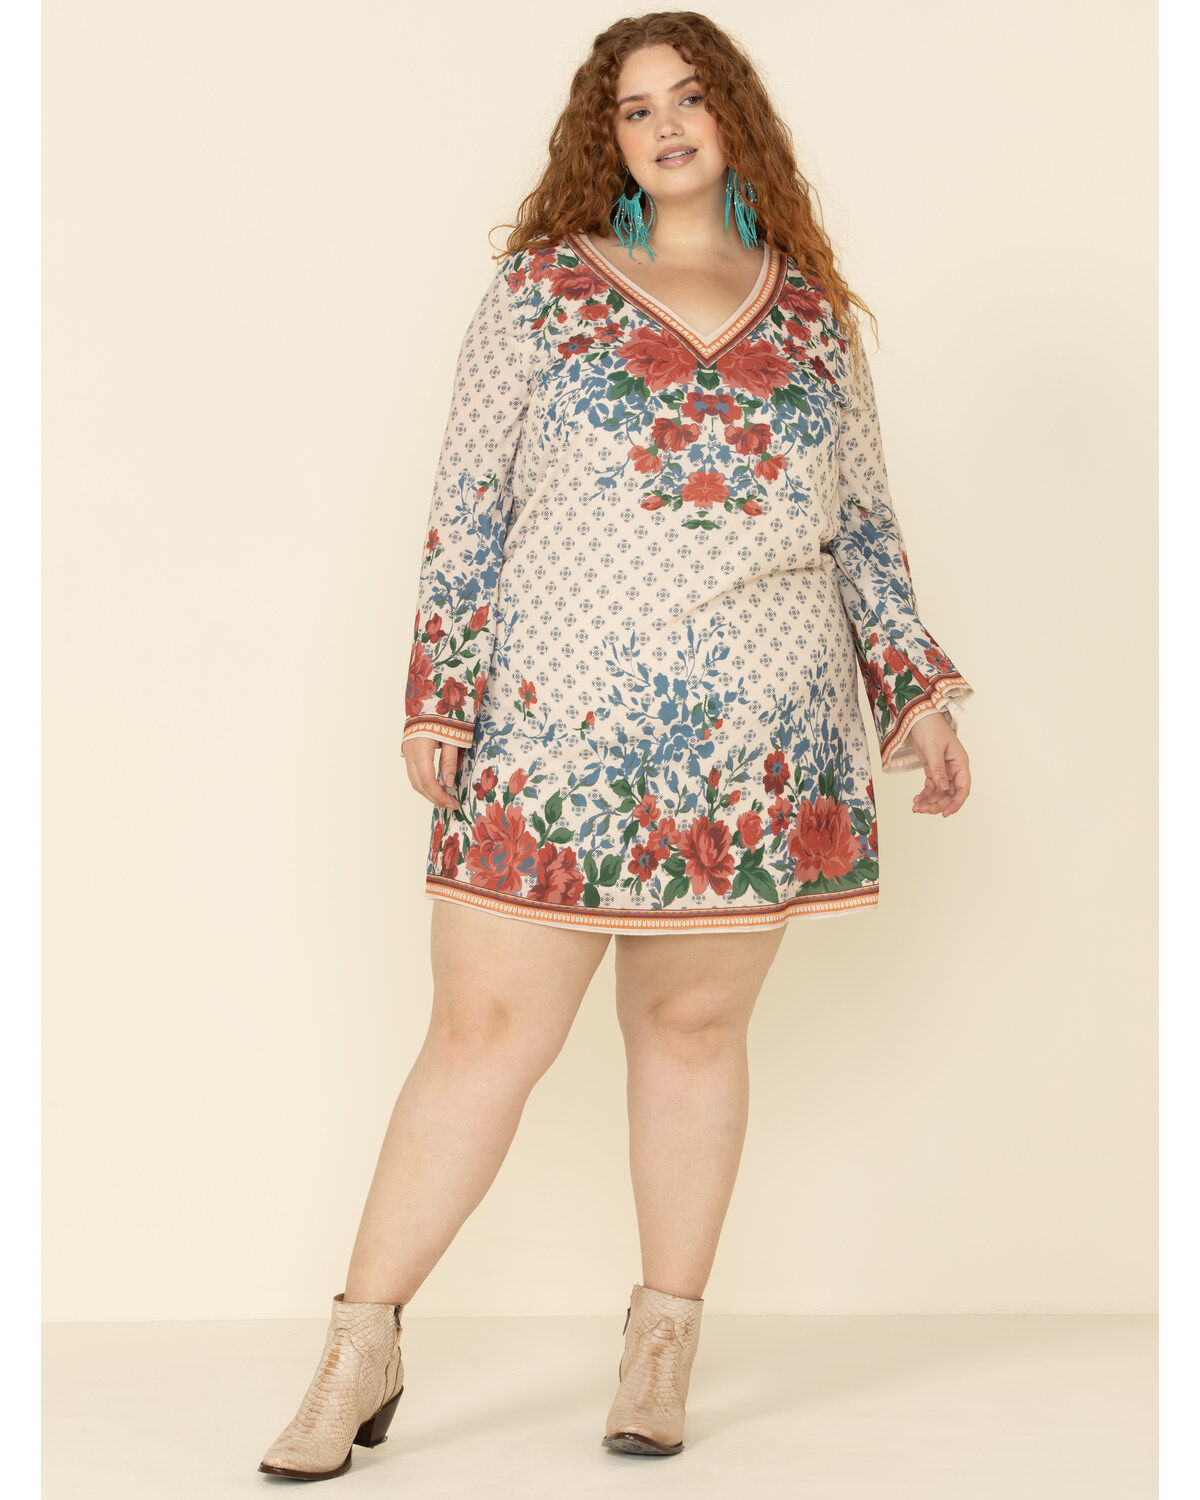 plus size western dresses and skirts